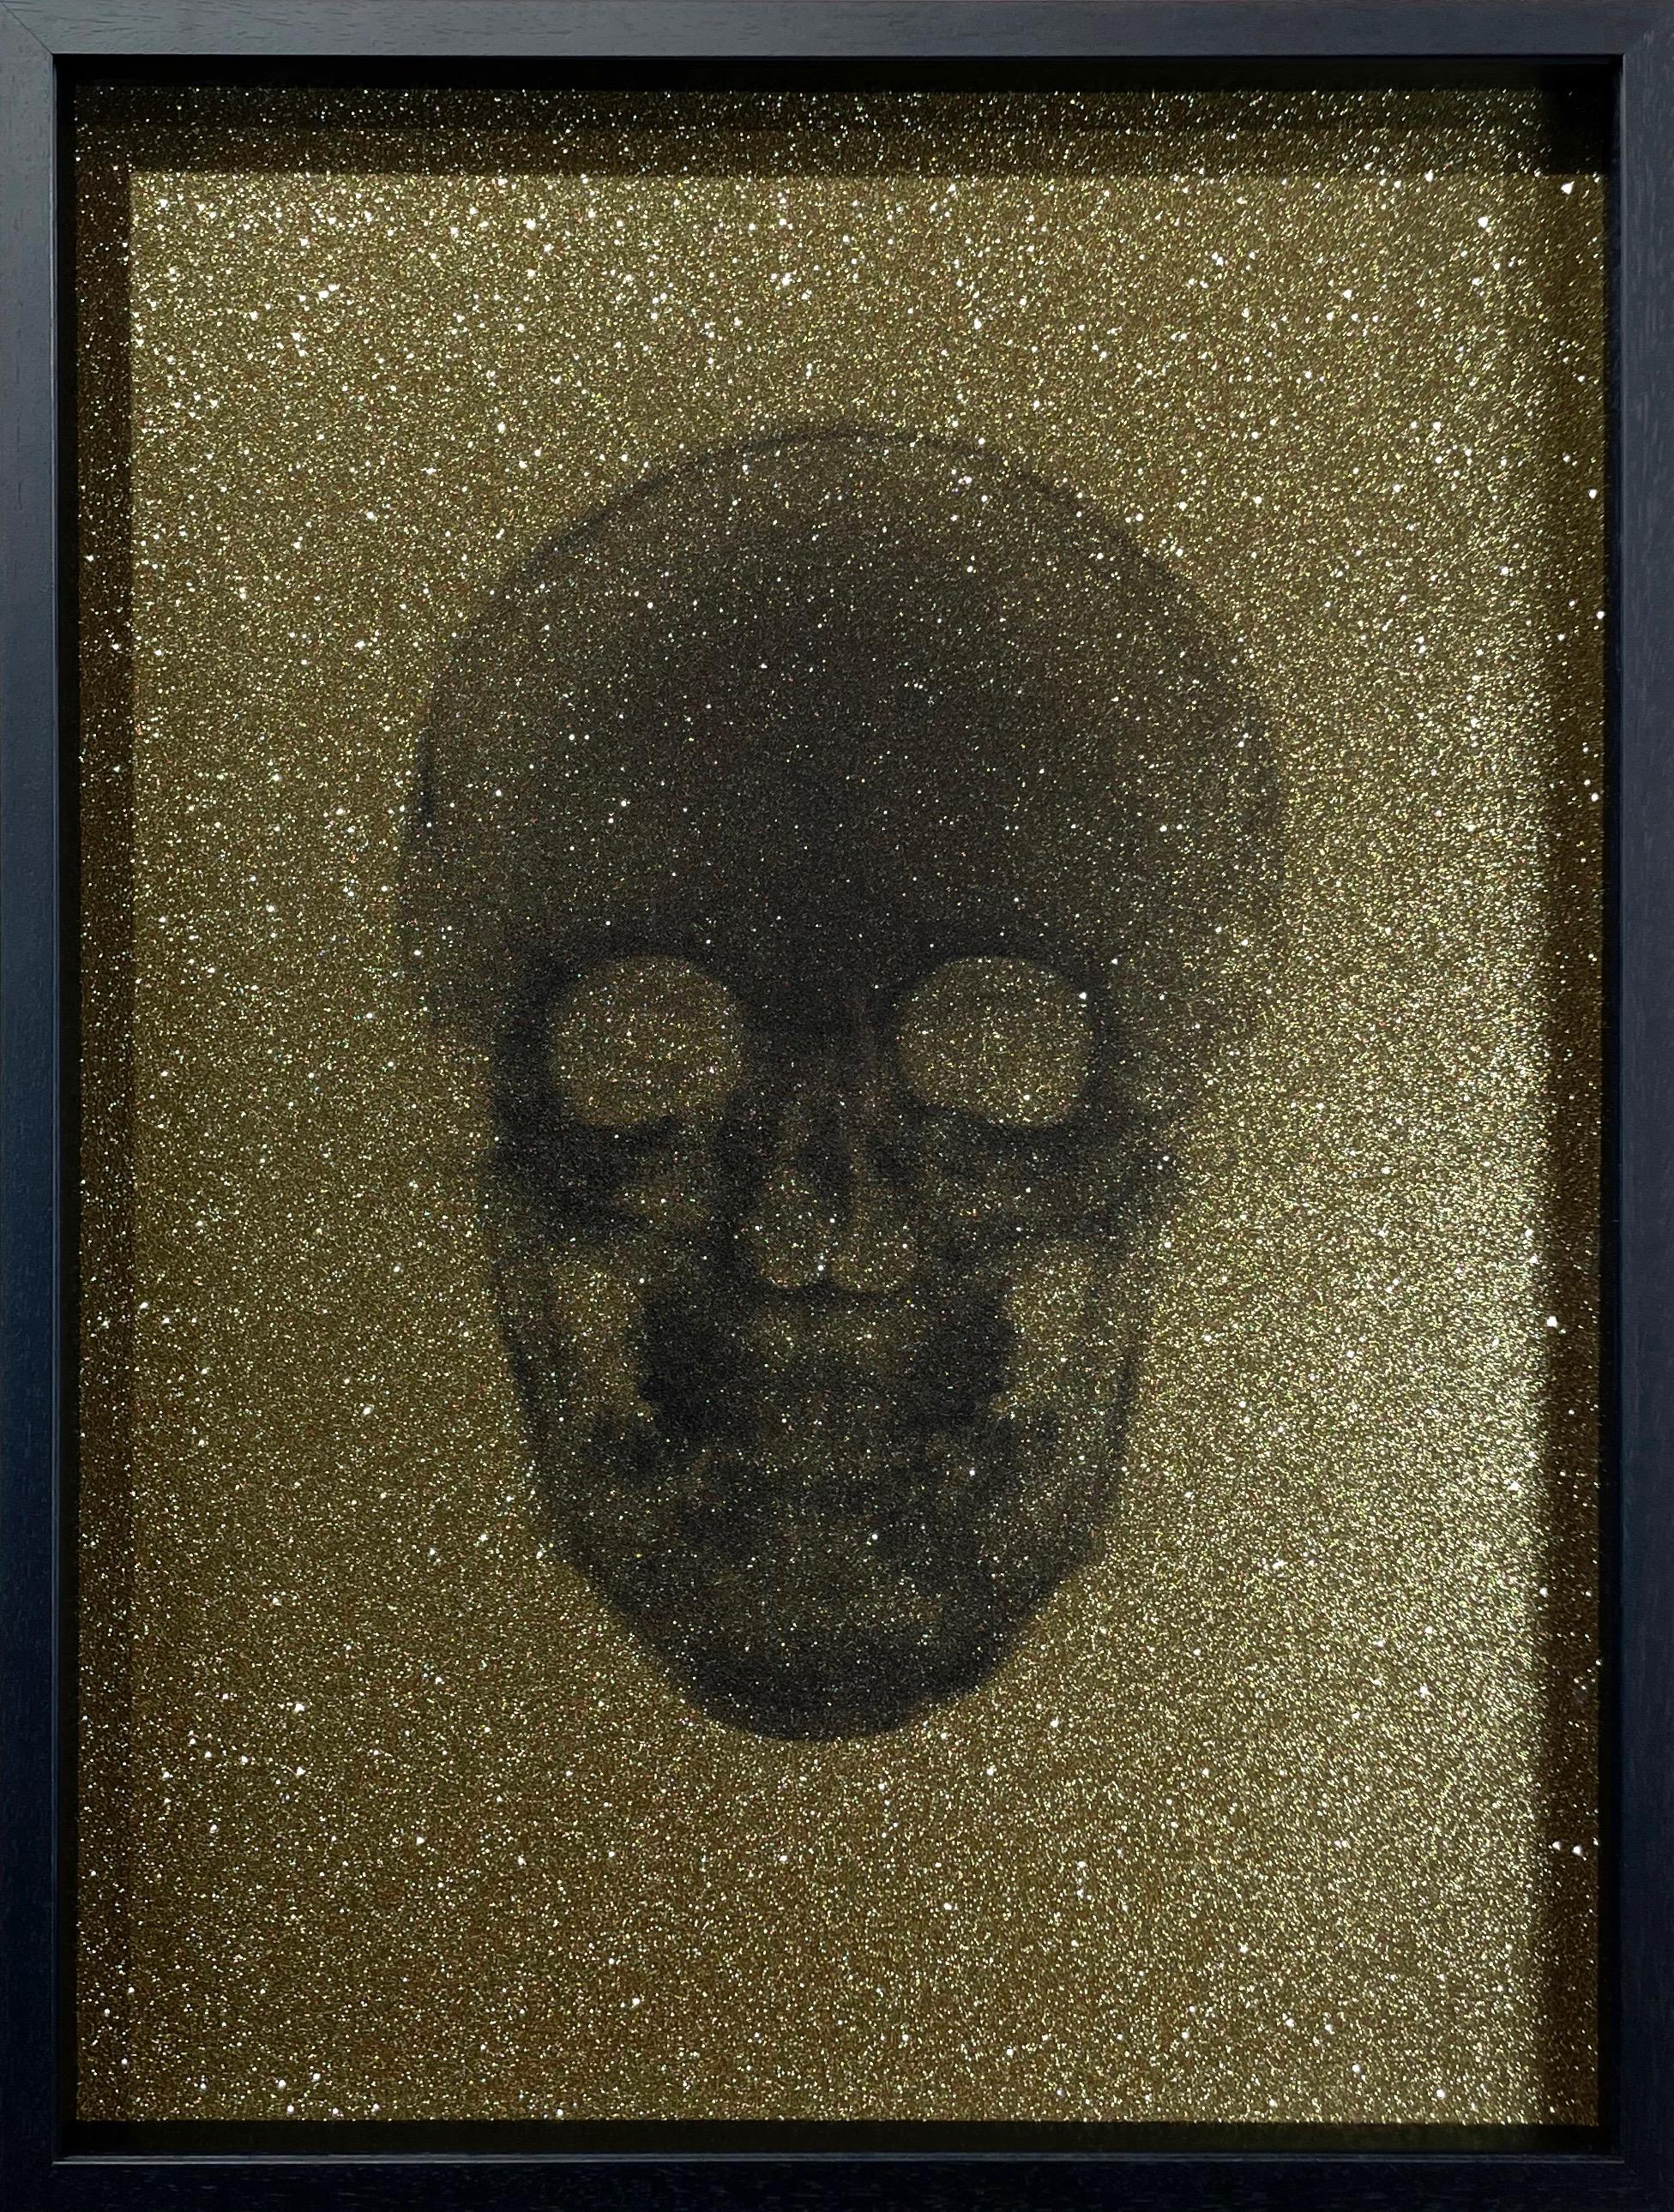 Crystal Skull (Black on gold) - Photograph by Nick Veasey